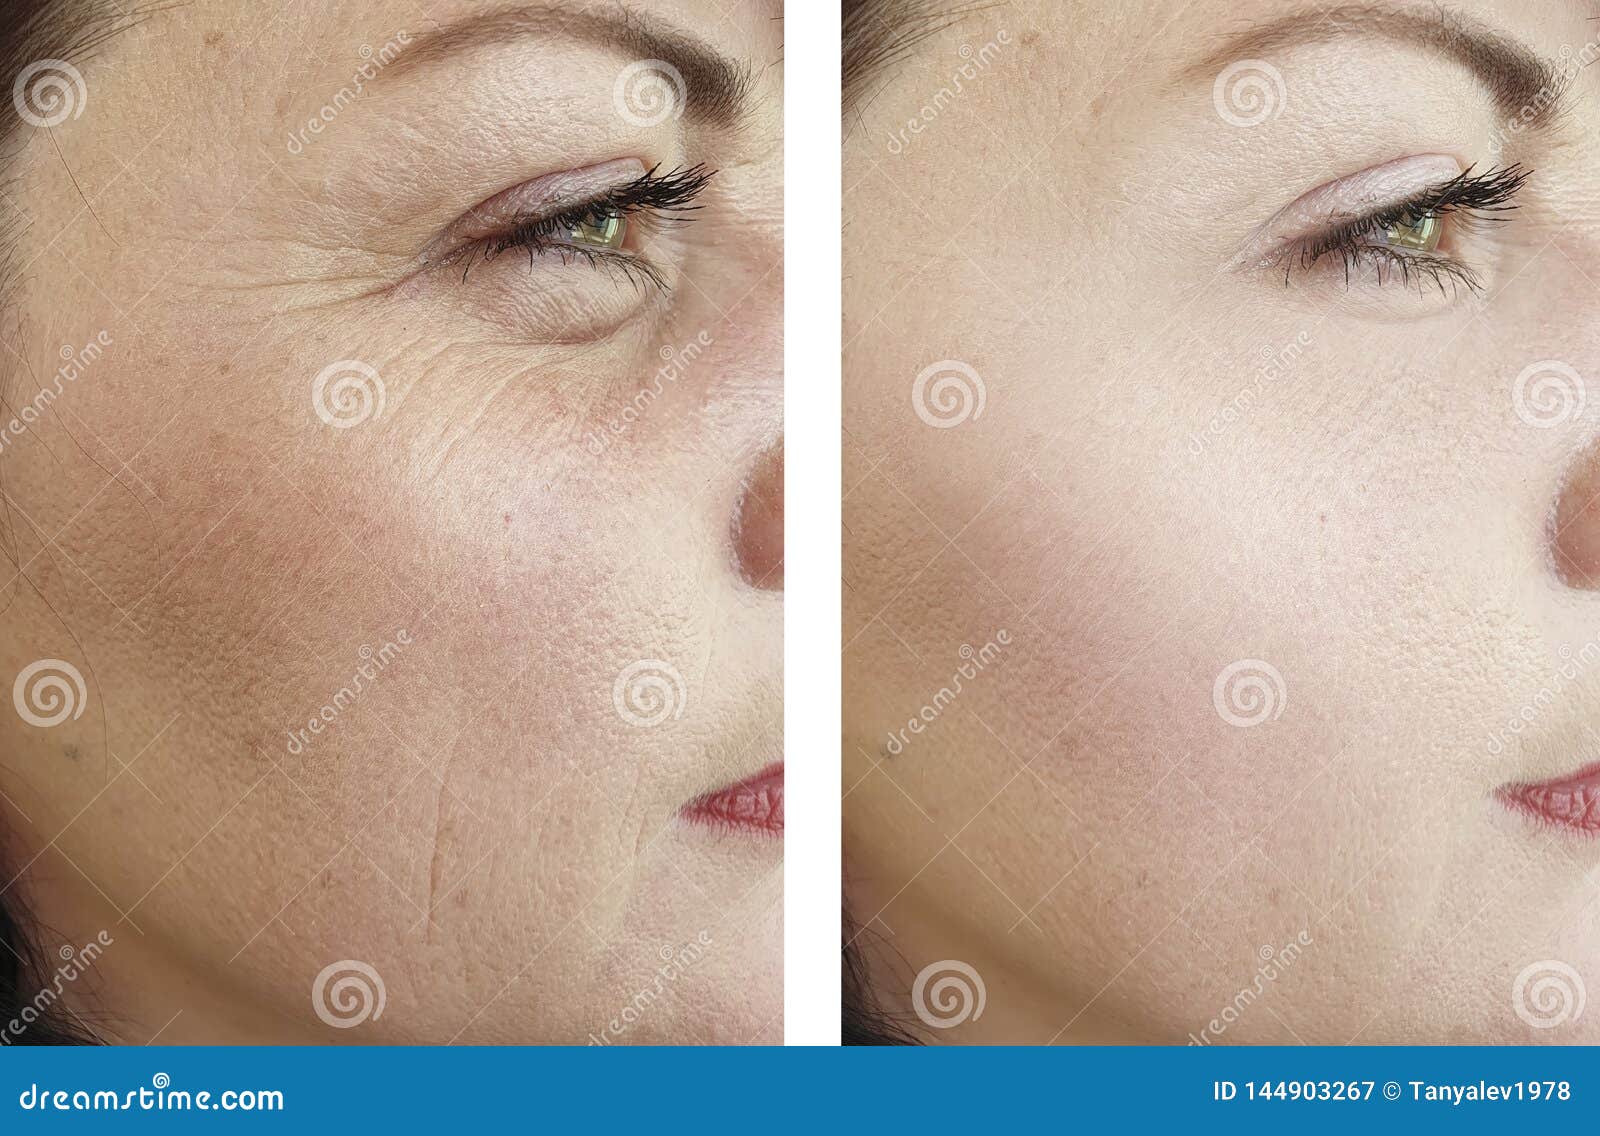 woman wrinkles face beautician effect therapydifference regeneration before and after treatments